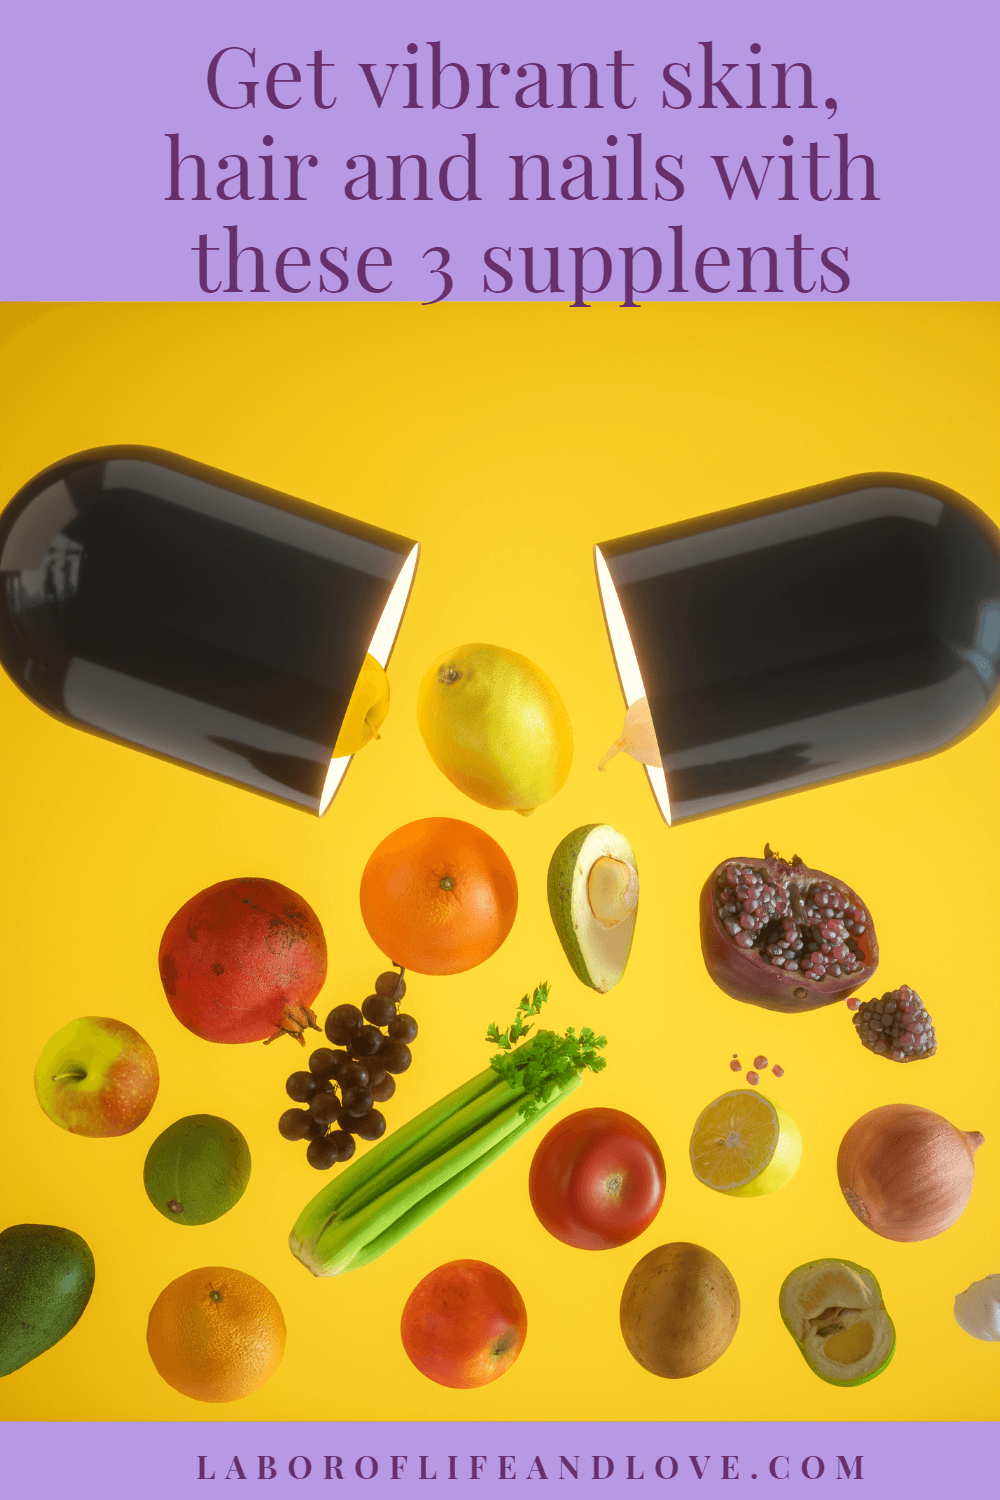 3 supplements for vibrant skin, hair and nails